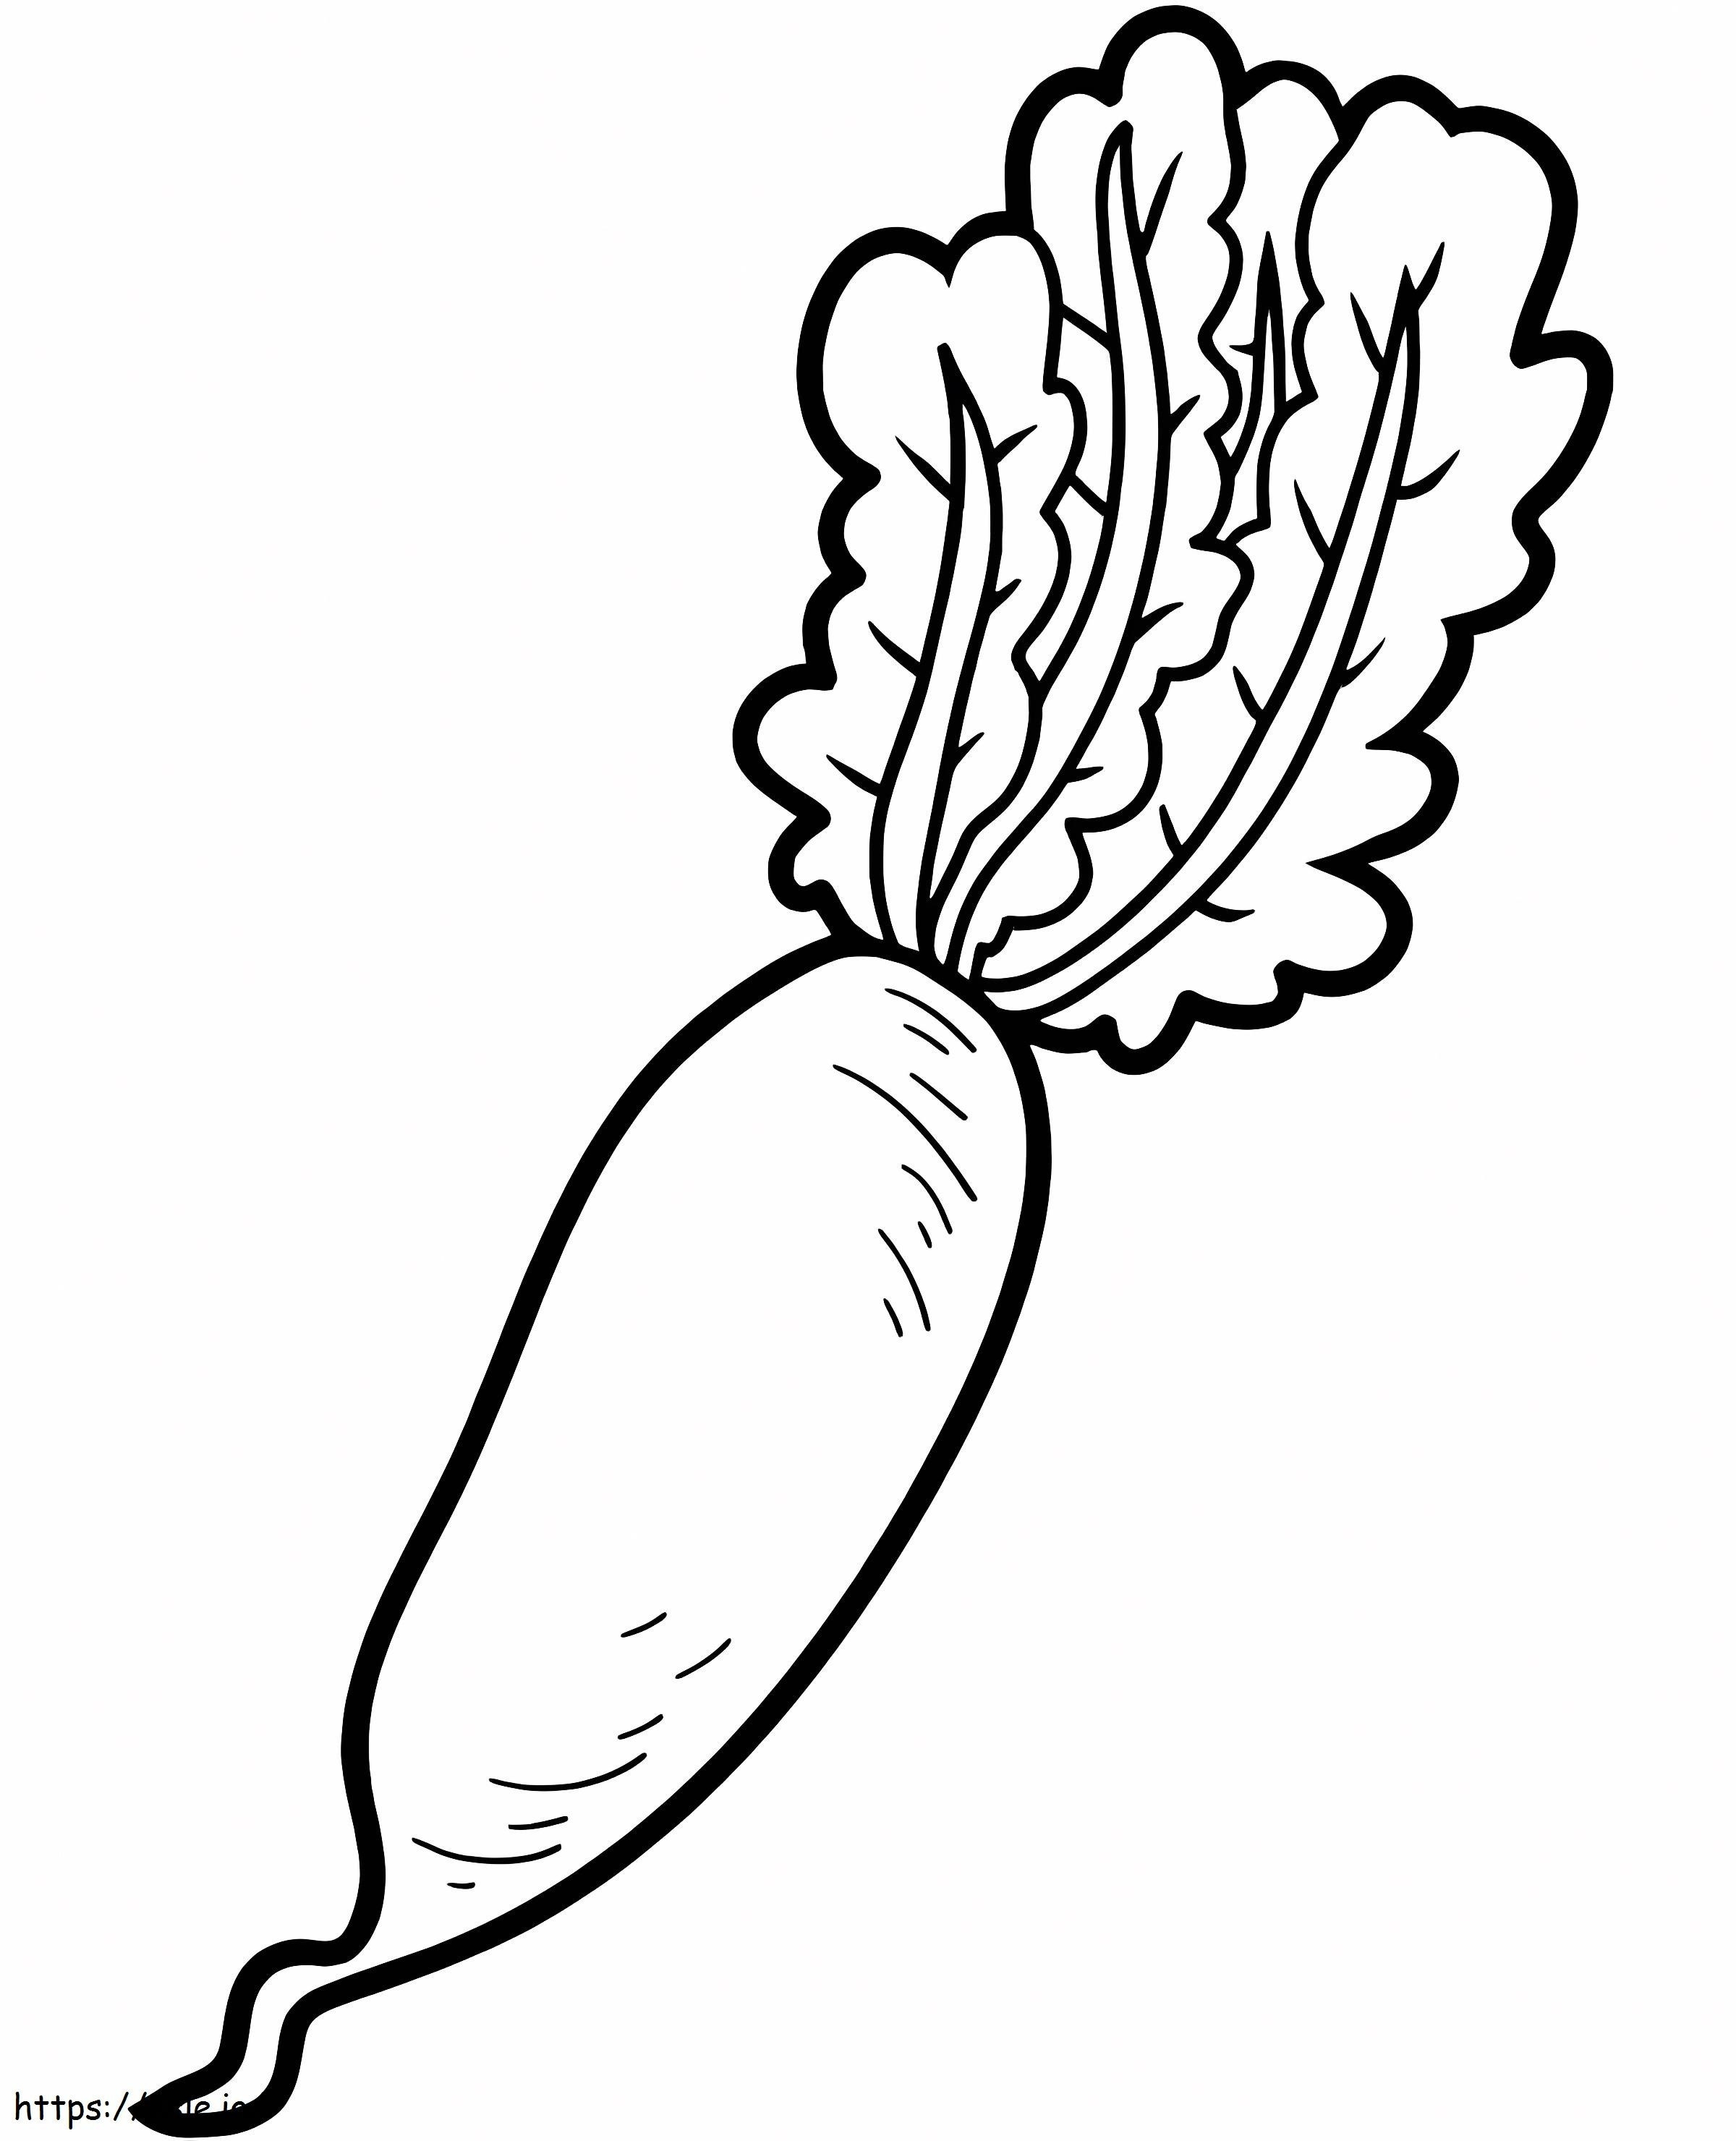 Vegetable Carrot coloring page